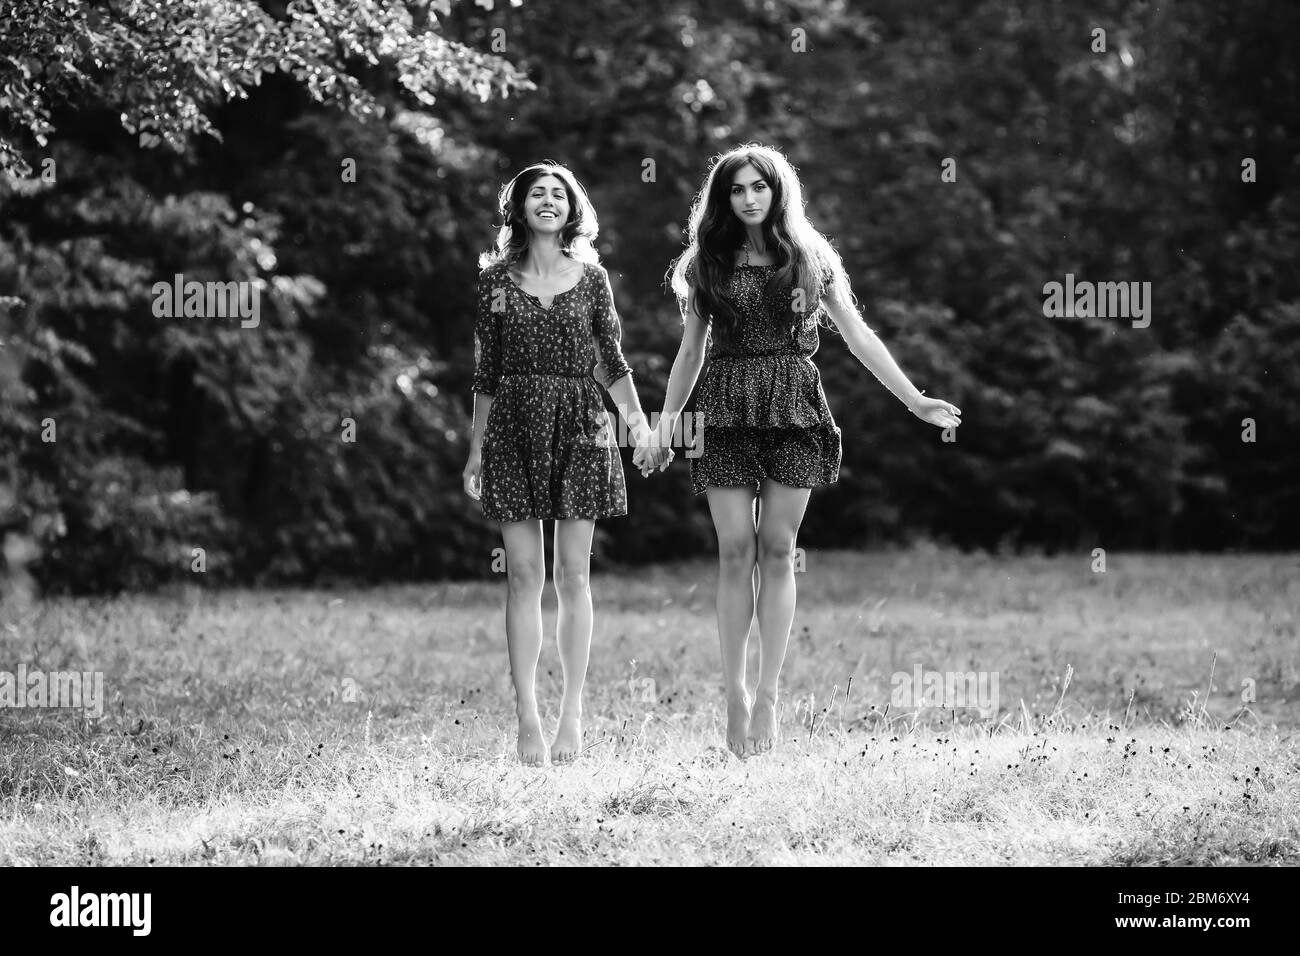 Two young smiling women levitate in the park black and white colors Stock Photo